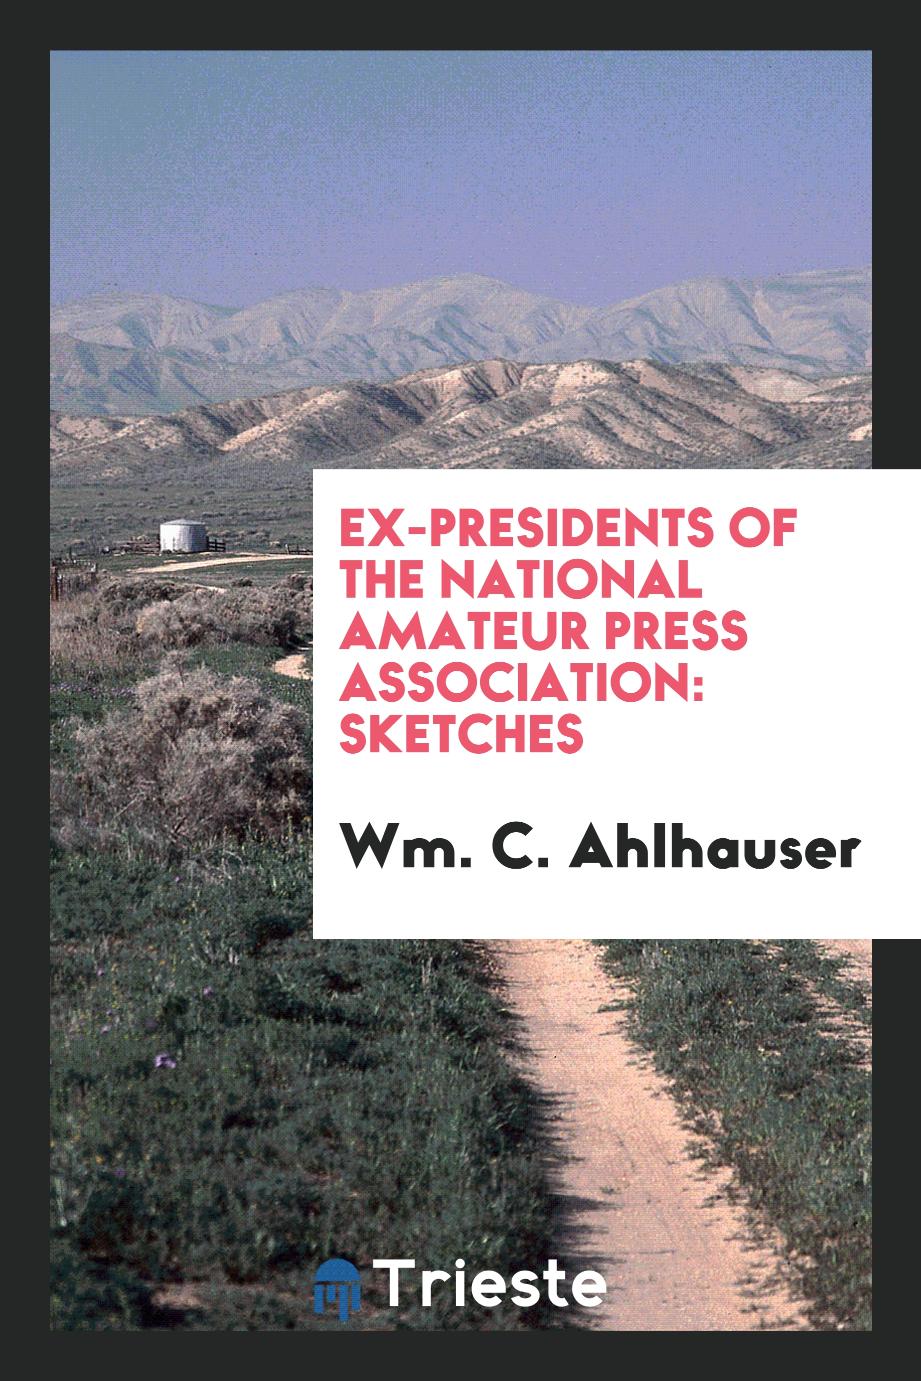 Ex-Presidents of the National Amateur Press Association: Sketches